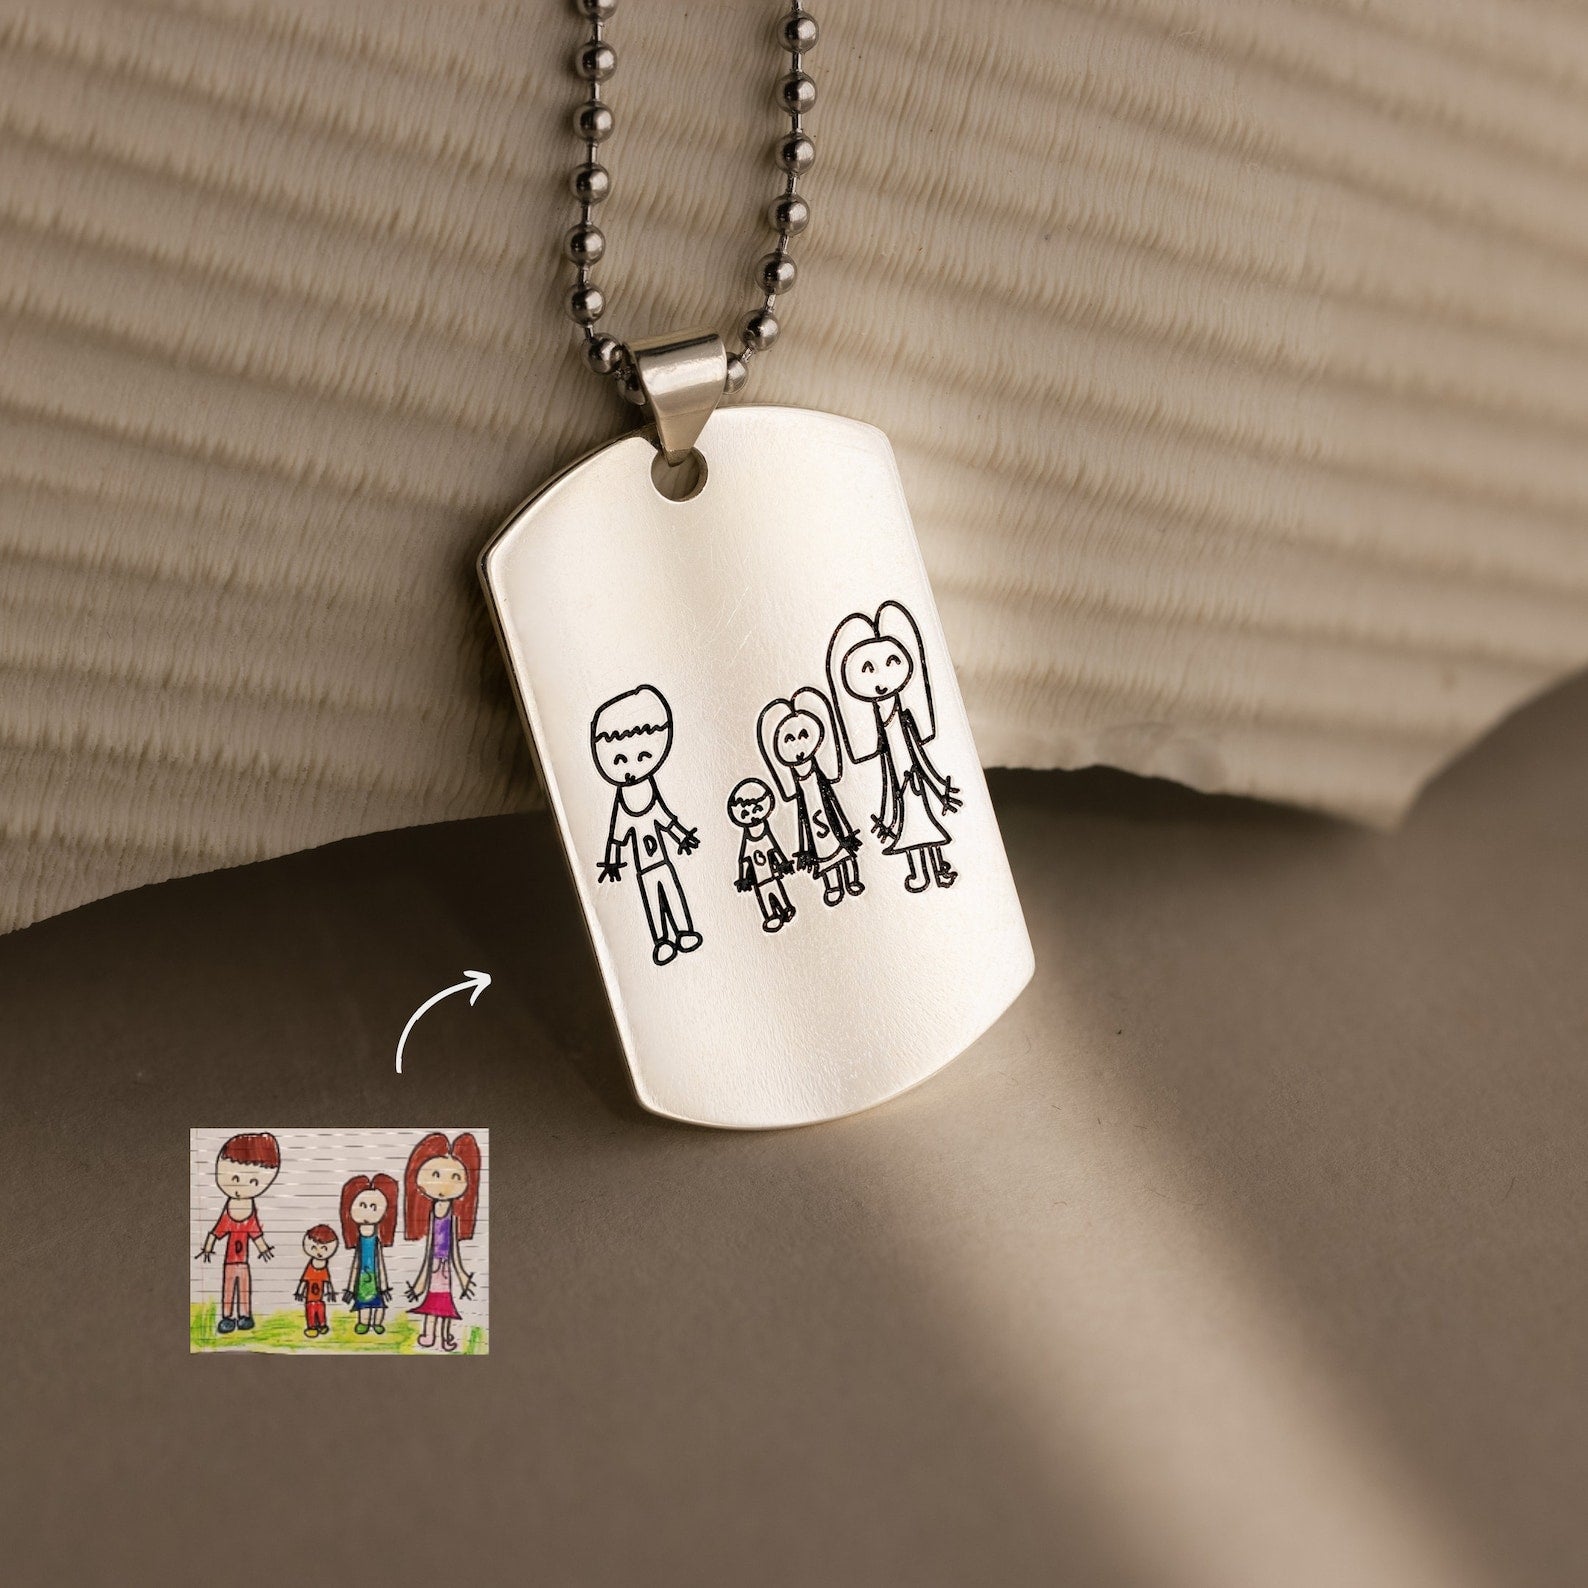 Matching Relationship Necklaces for Couples – CoupleGifts.com